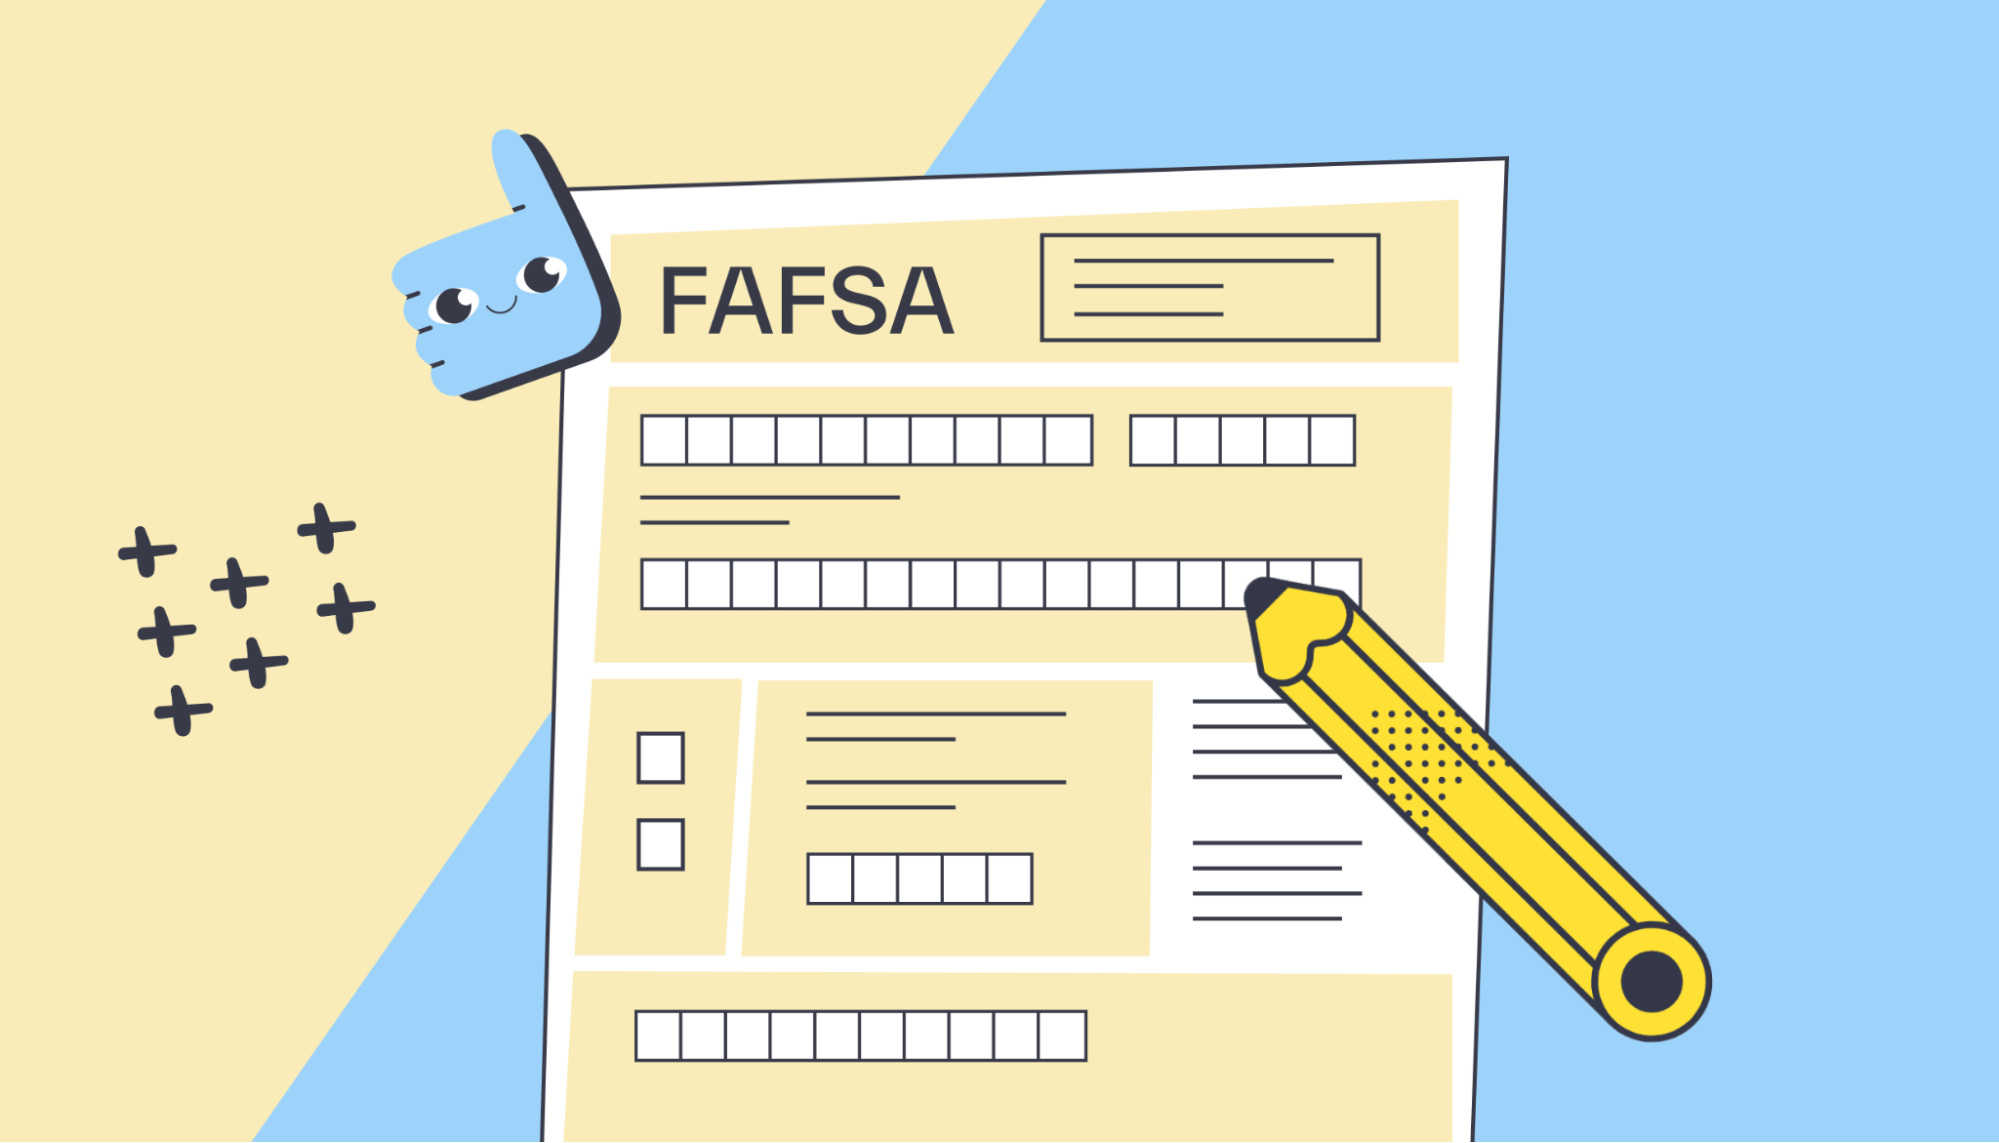 Free Application for Federal Student Aid (FAFSA)